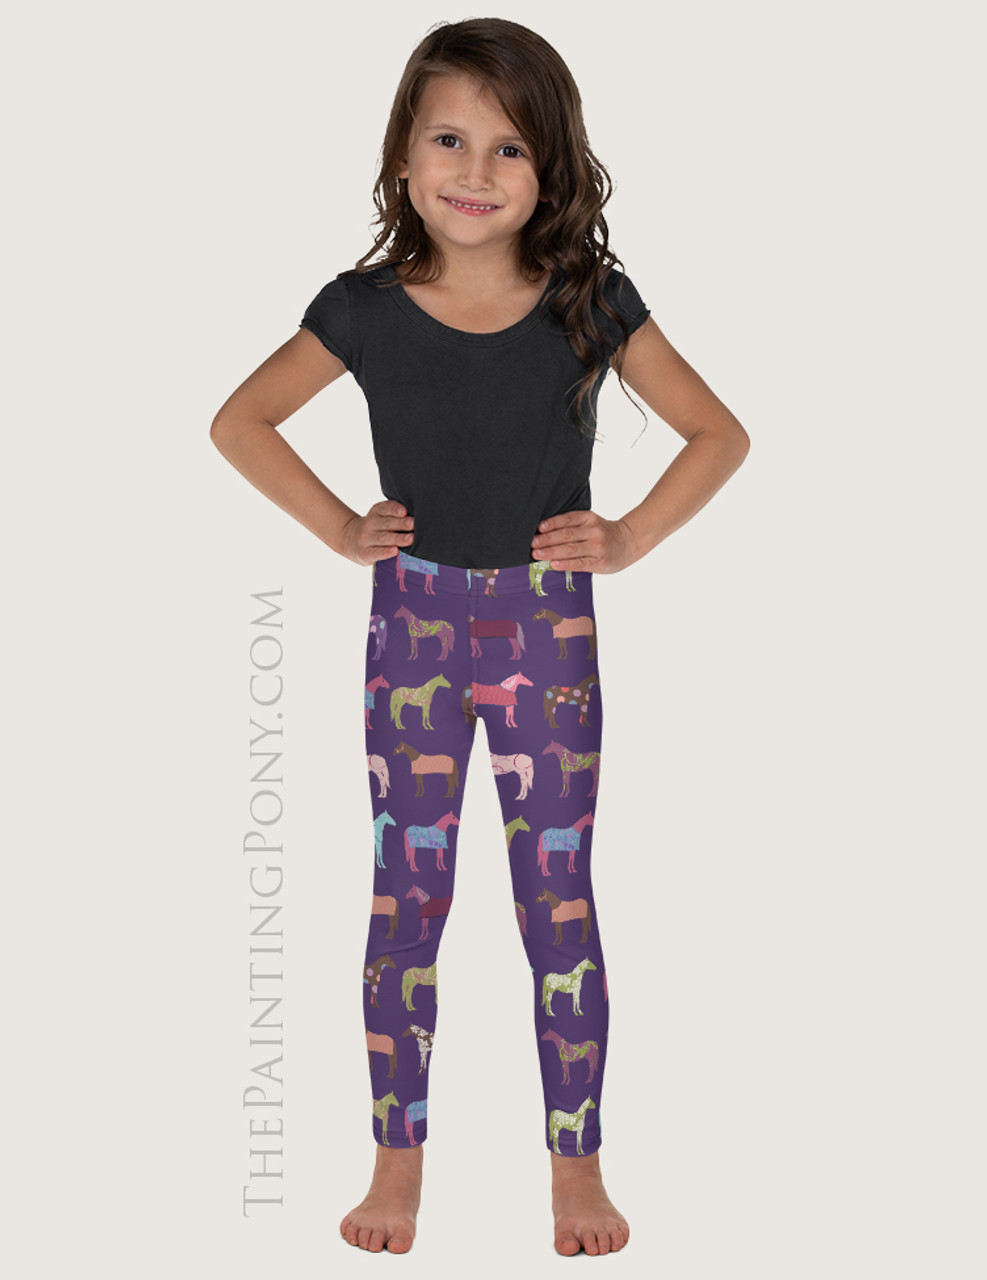 https://cdn11.bigcommerce.com/s-dthur0g/images/stencil/1280x1280/products/1915/12700/colorful_horse_lover_equestrian_leggings_for_kids_2T_front__10753.1540677923.jpg?c=2